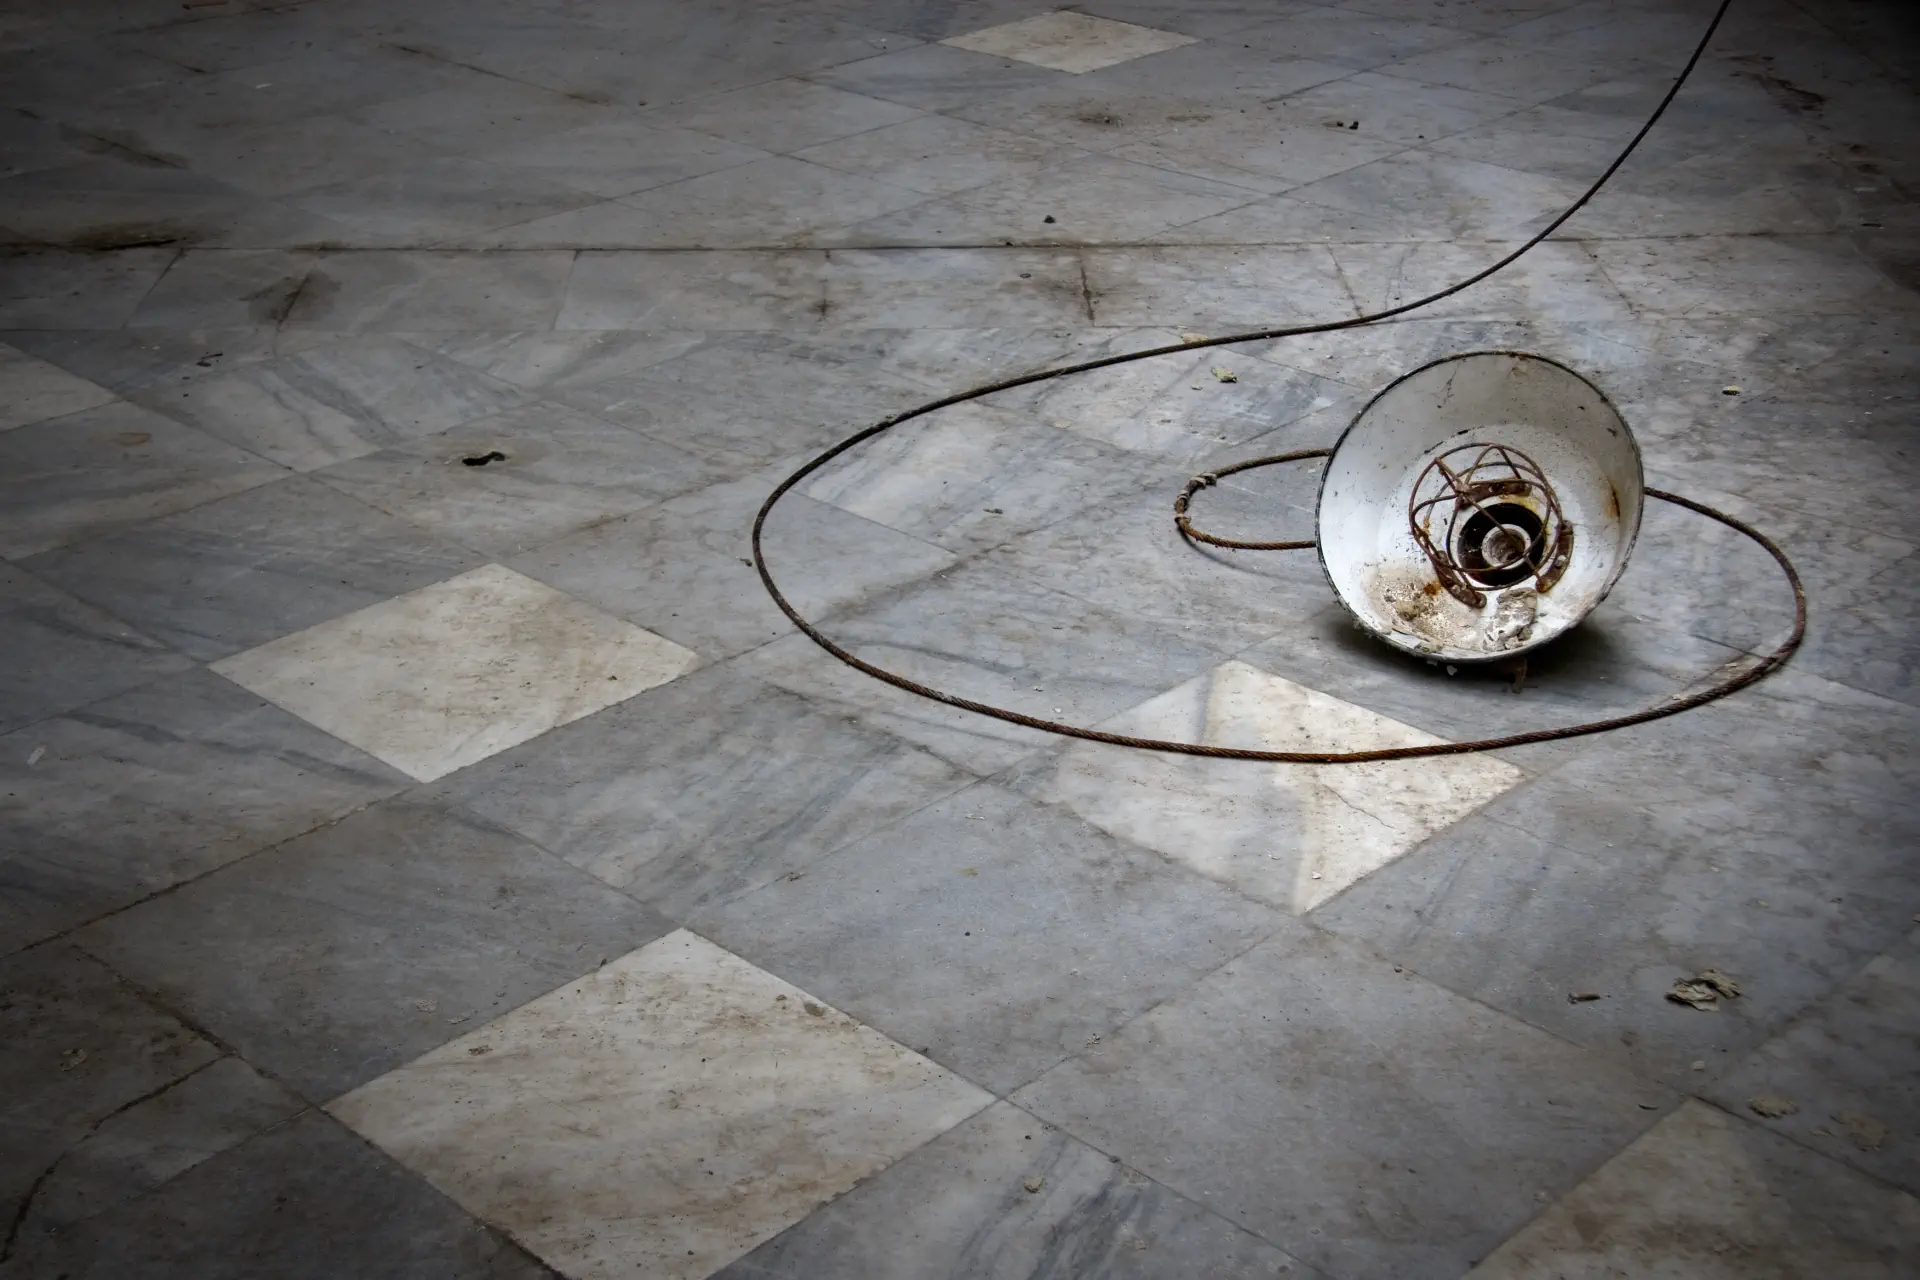 A broken lamp is lying on the ground, its cord wound up in a spiral shape.